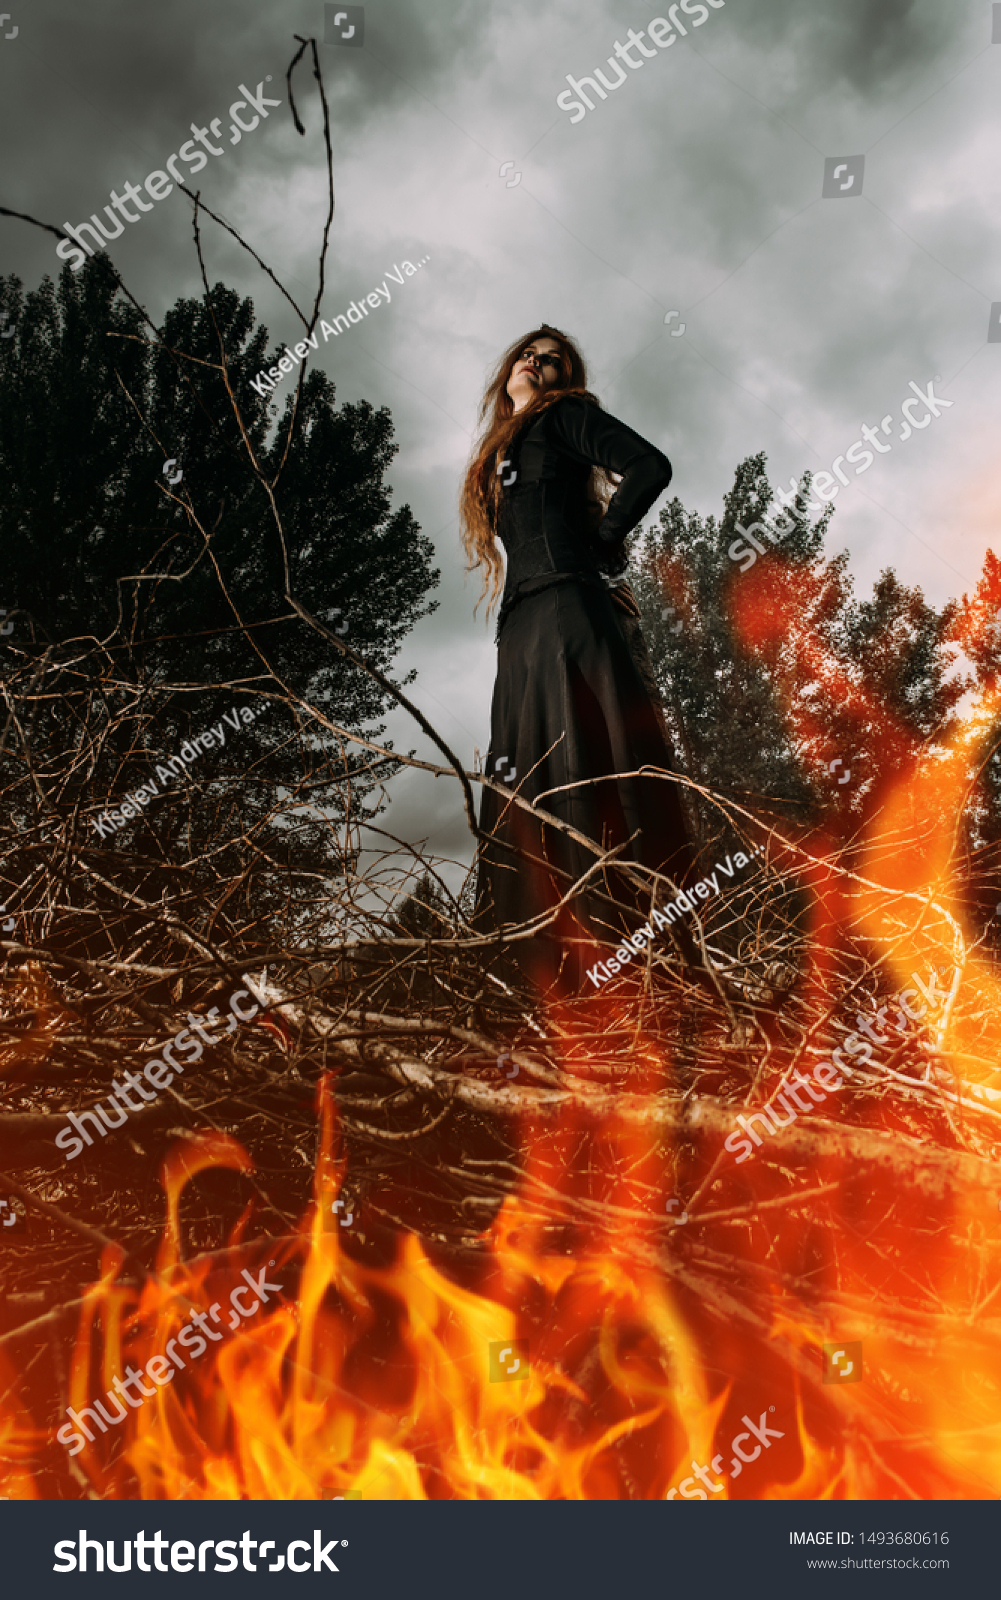 A portrait of an angry witch tied for incineration. Magic, dark force, spell.  #1493680616